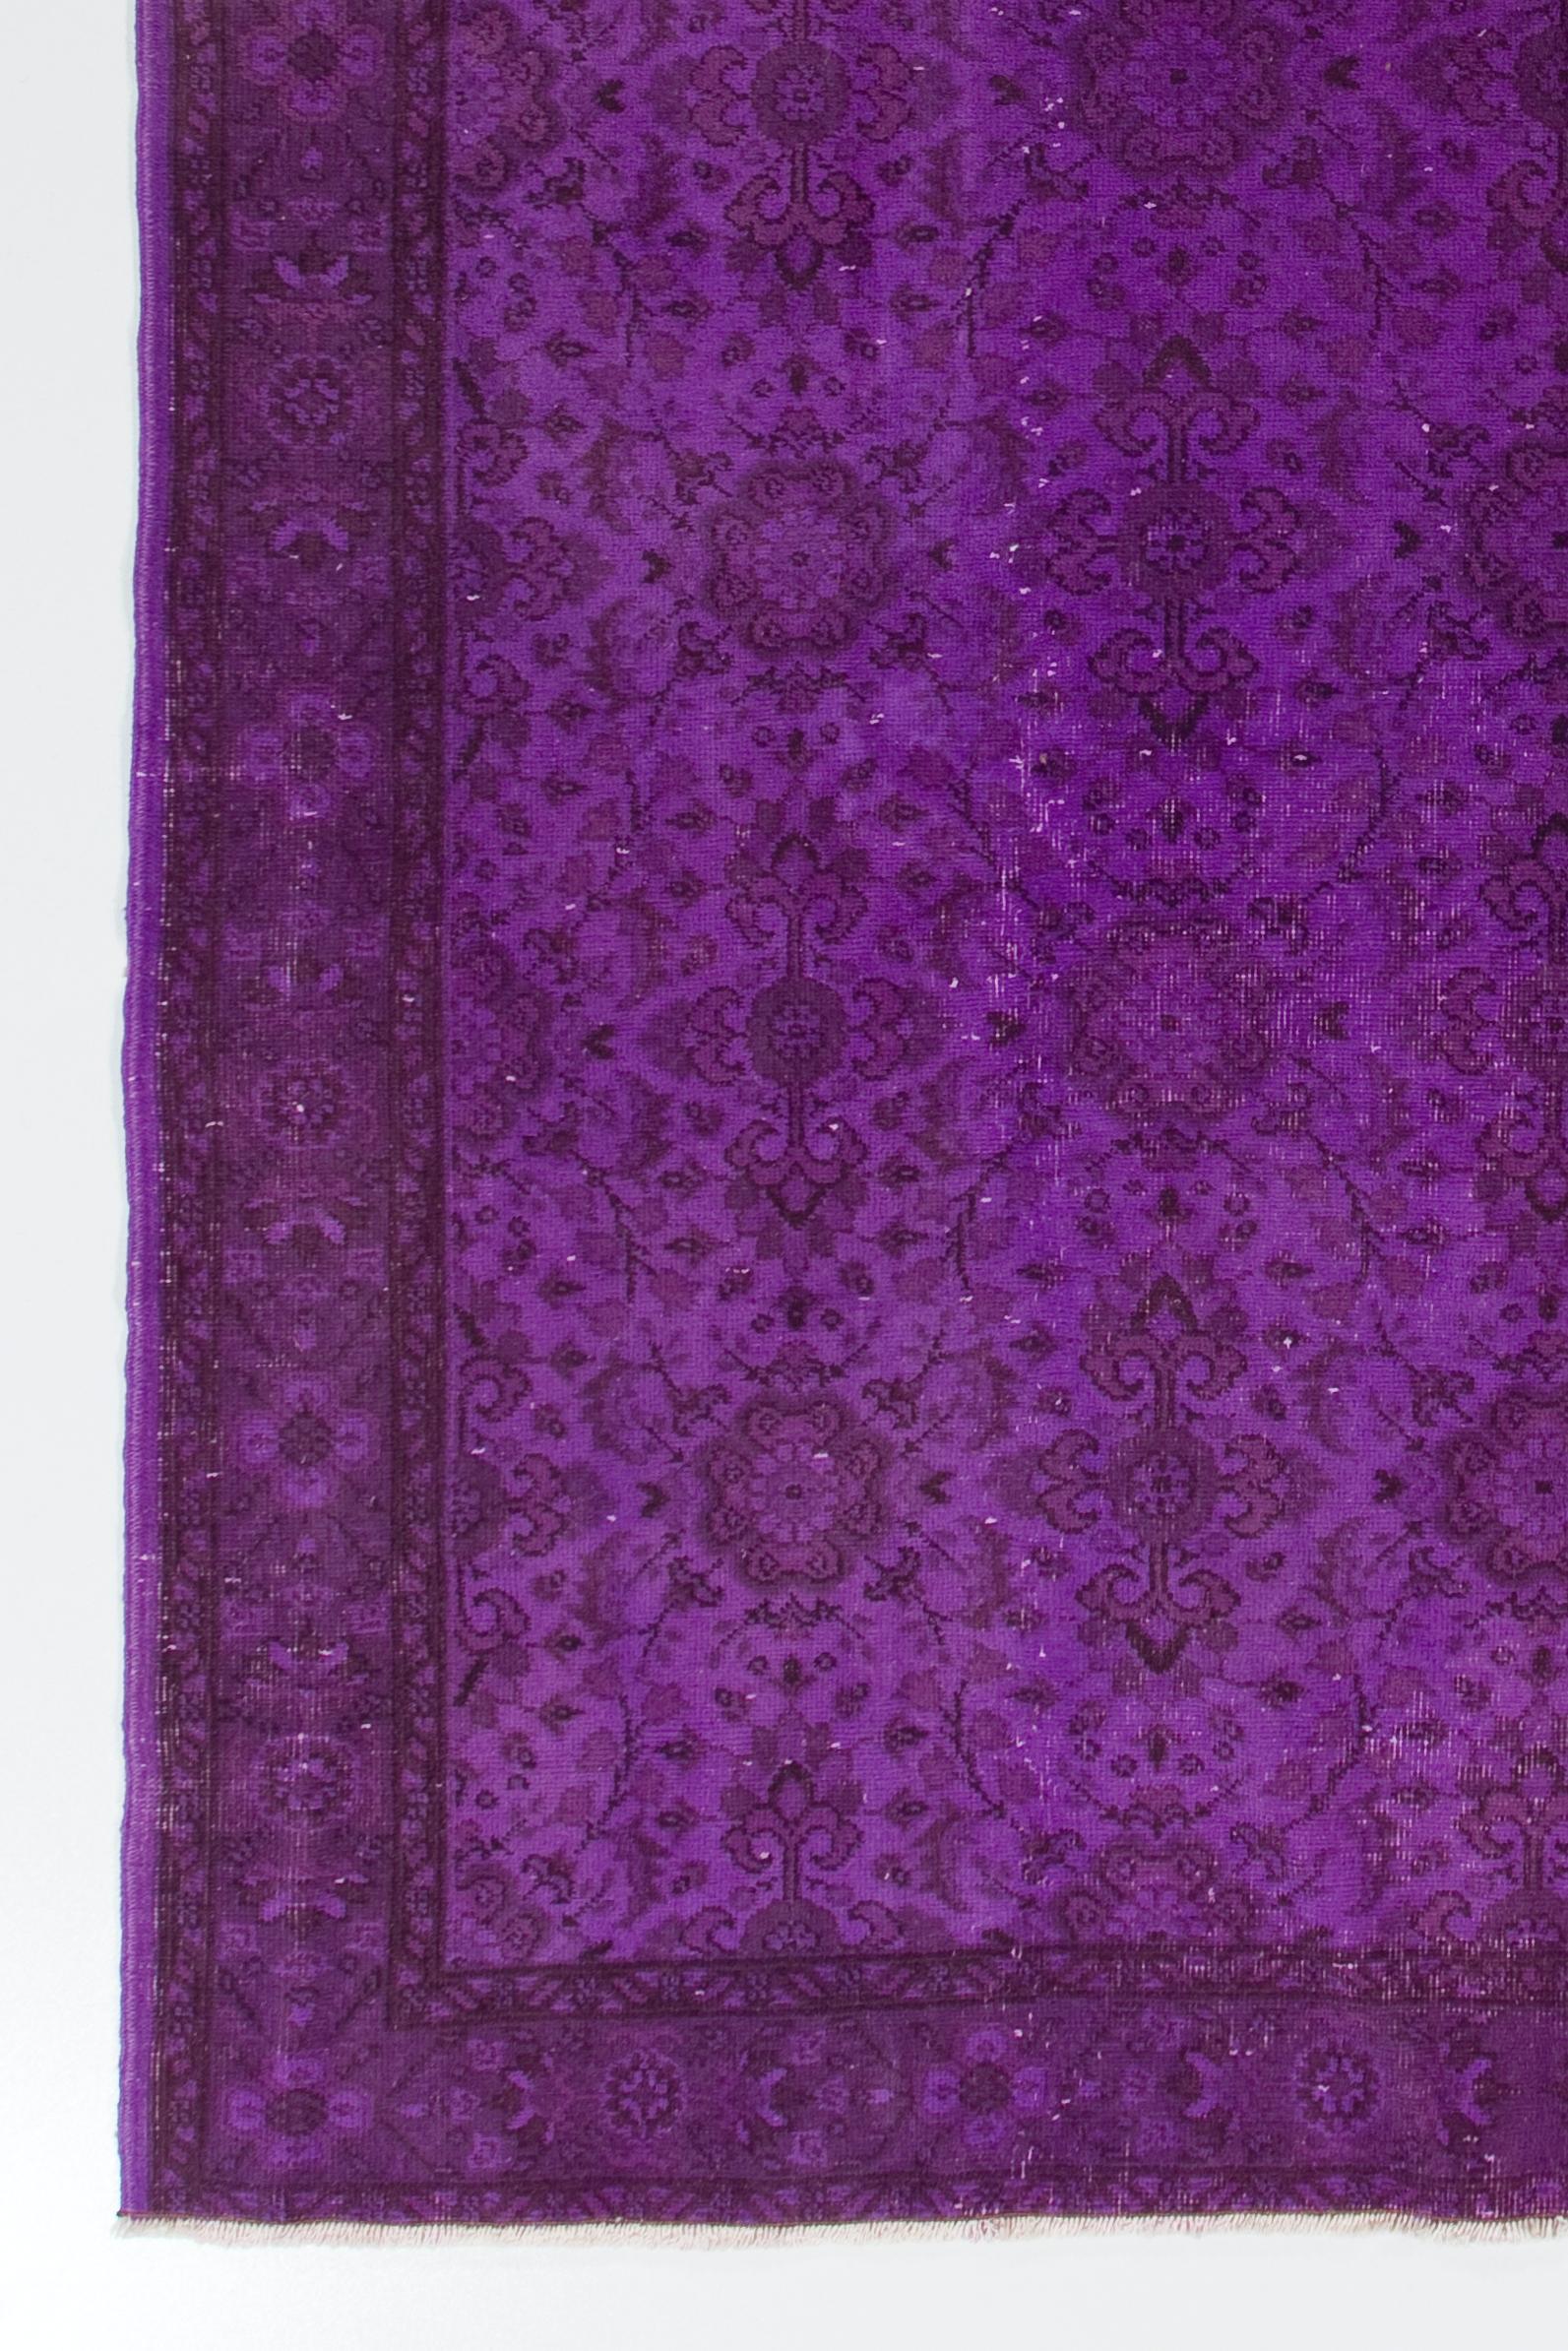 Modern Turkish Area Rug in Purple, Floral Patterned Handmade Carpet In Good Condition For Sale In Philadelphia, PA